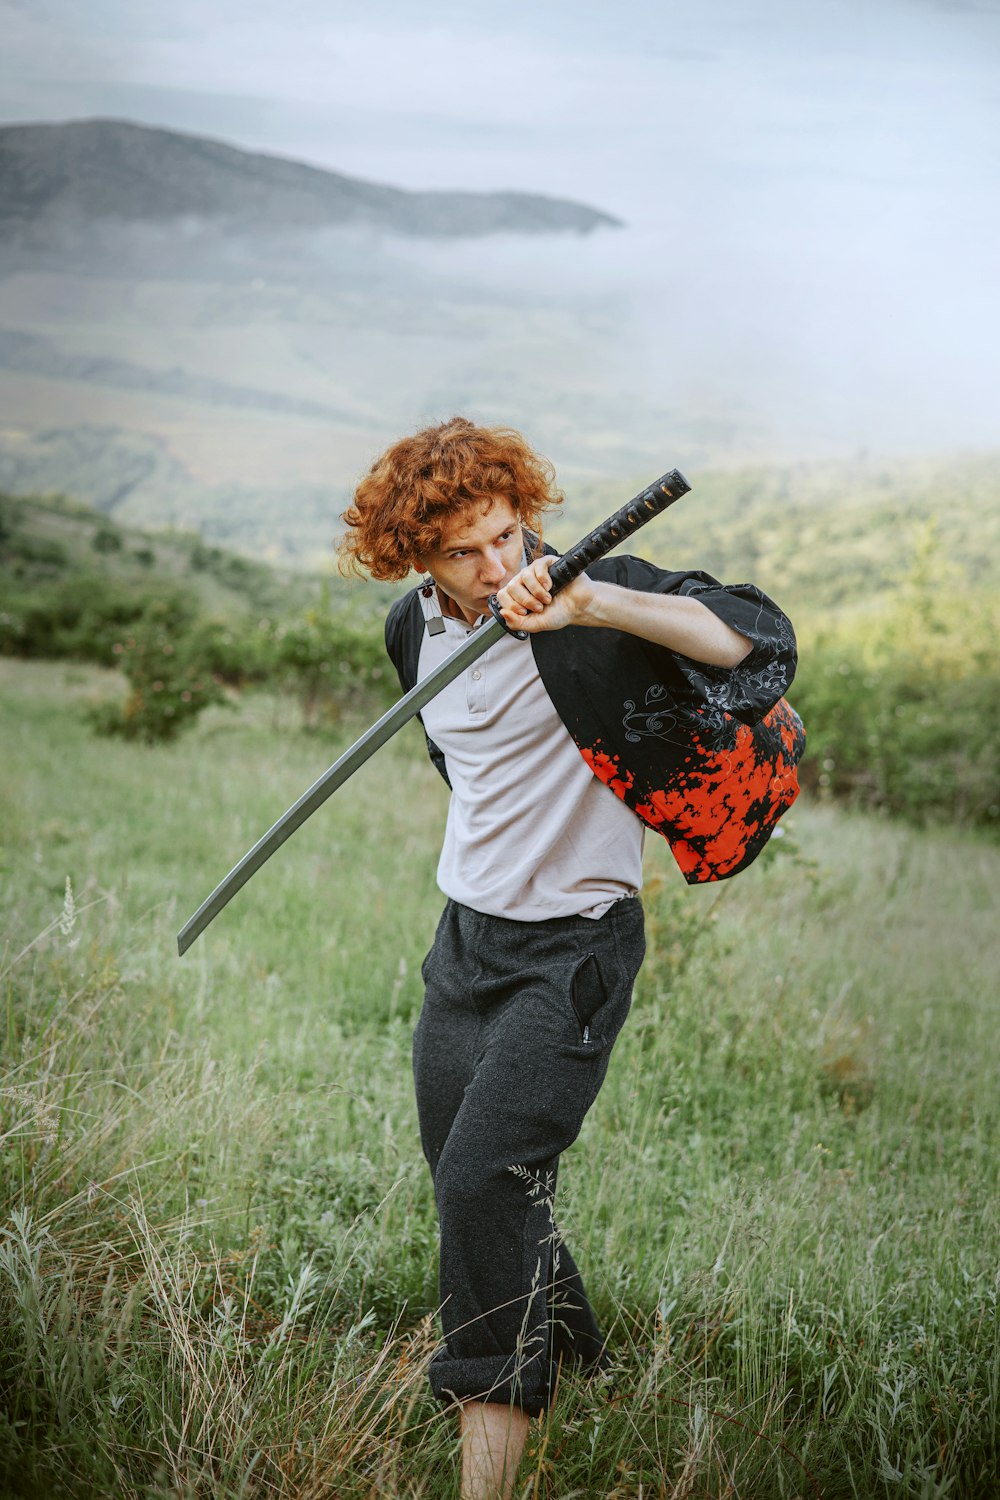 a man with red hair is holding a sword